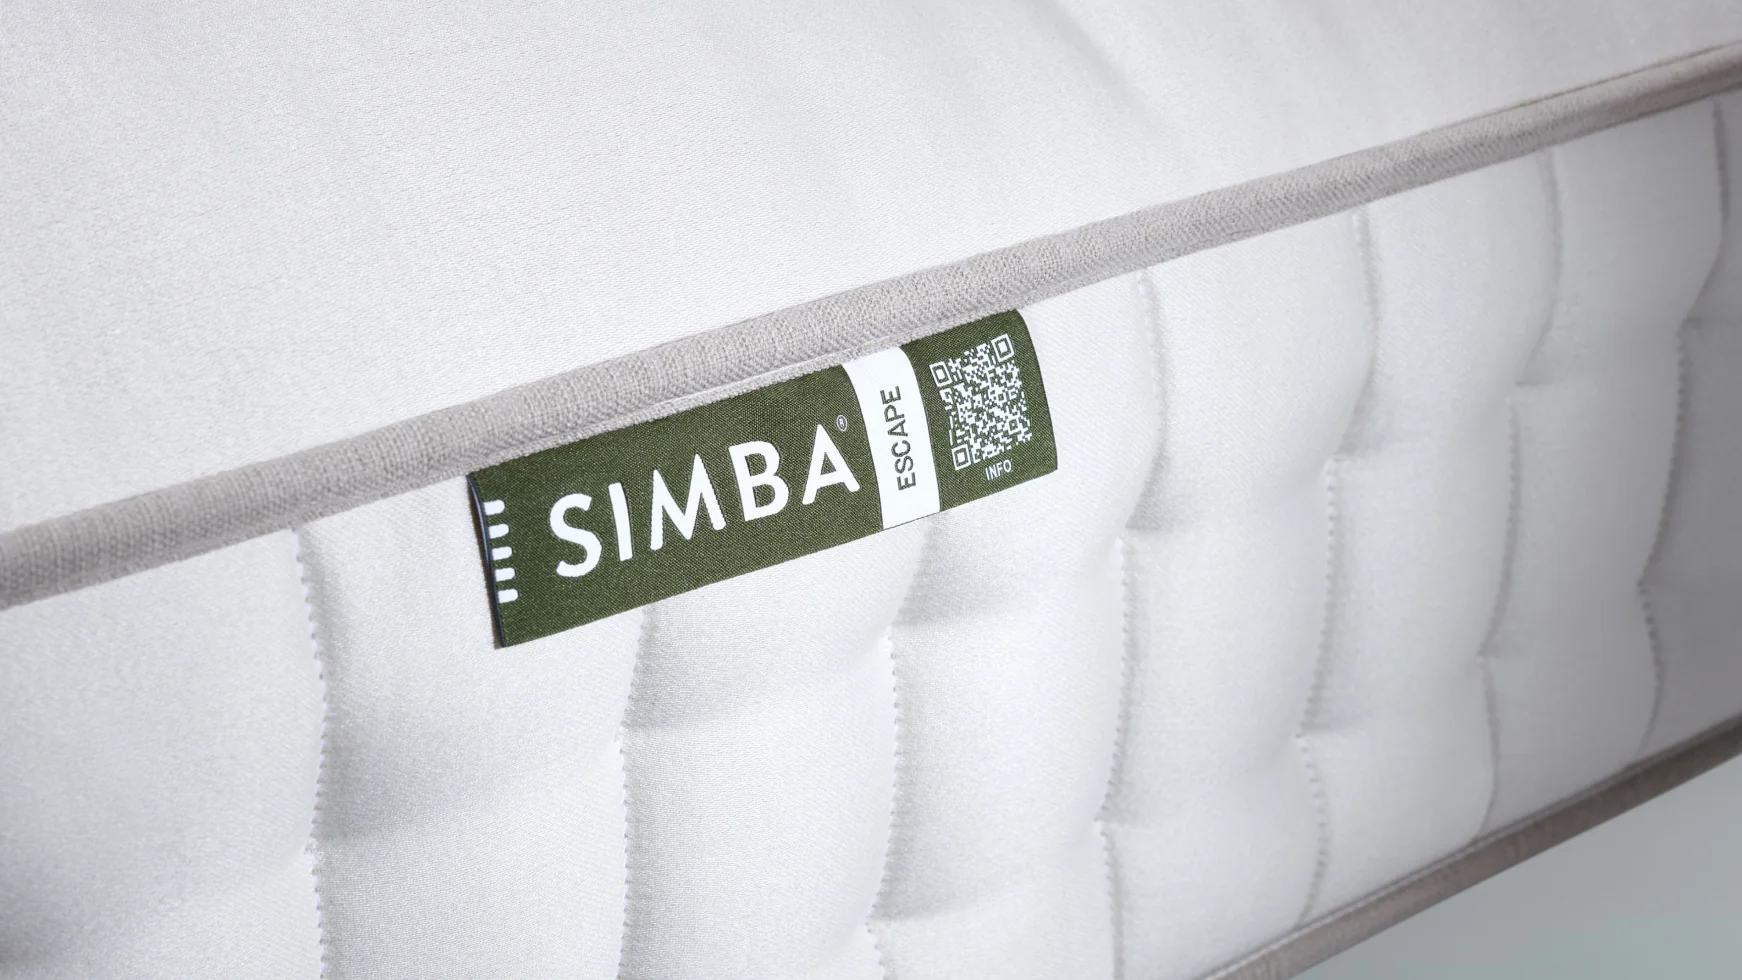 The corner of the Simba Earth Escape Mattress showing the Simba label